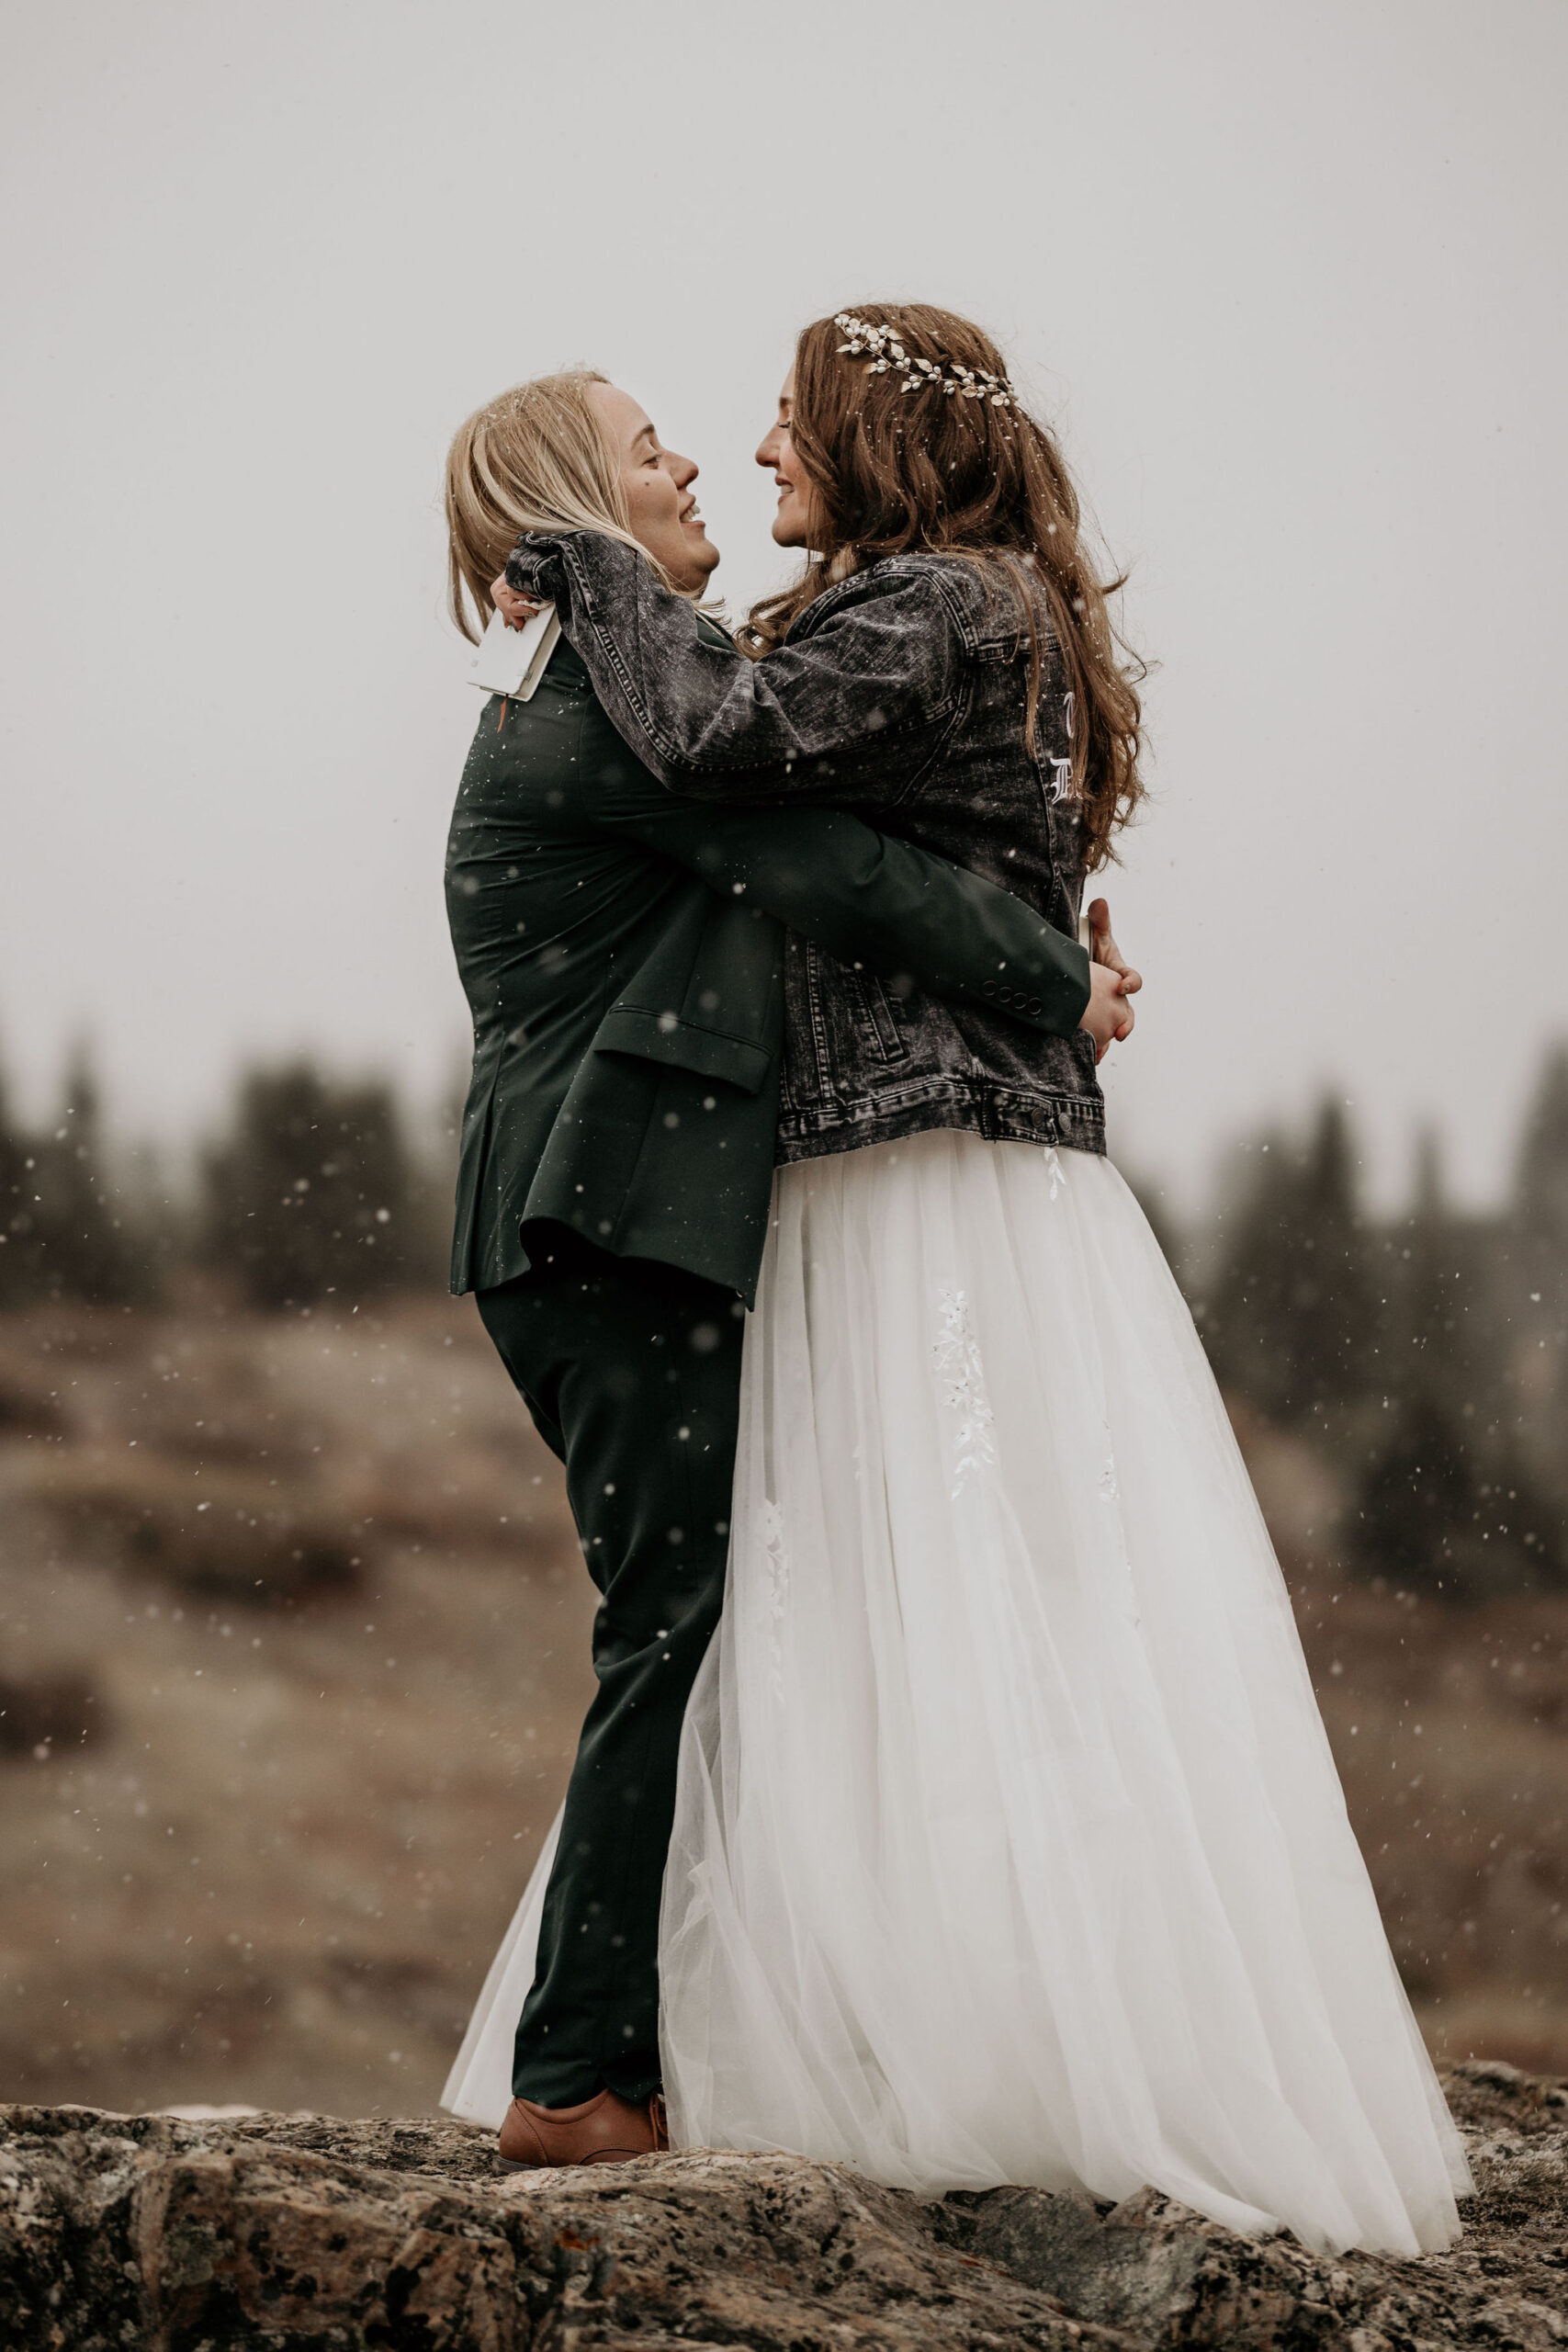 Two brides hug in the snow after canceling their wedding to elope.